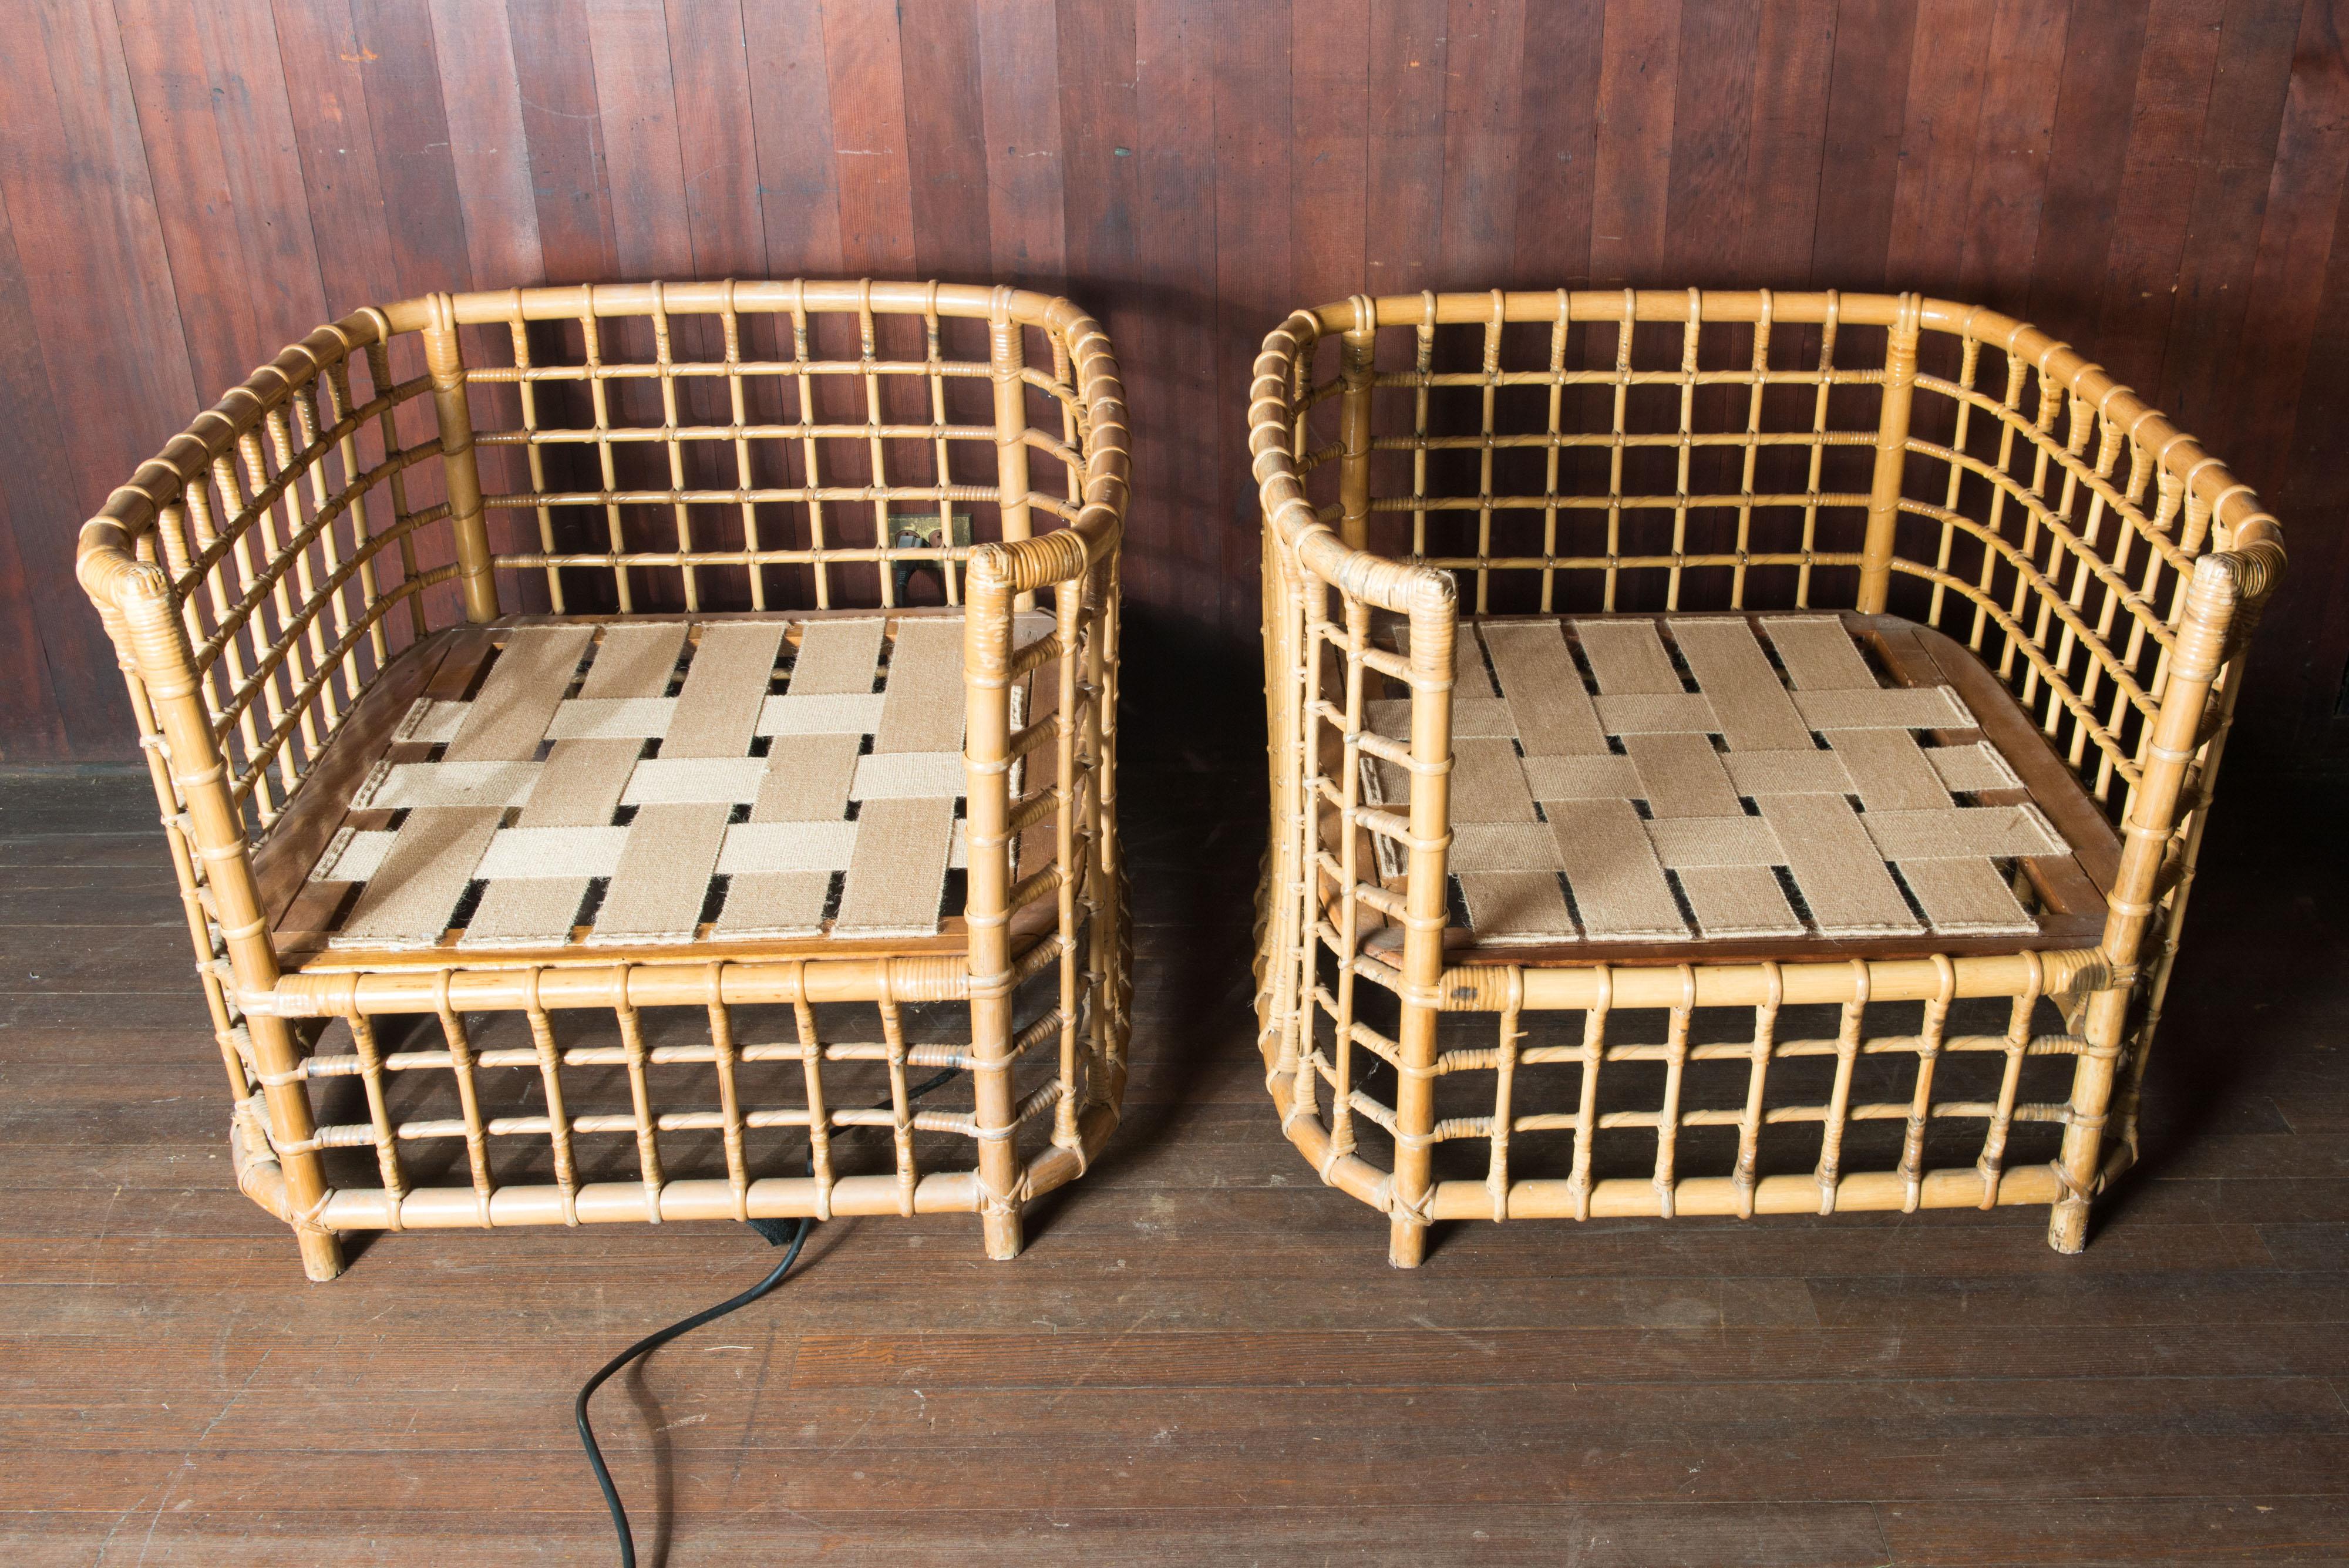 Henry Olko Pair of Mid-Century Modern Square Series Rattan Armchairs For Sale 3